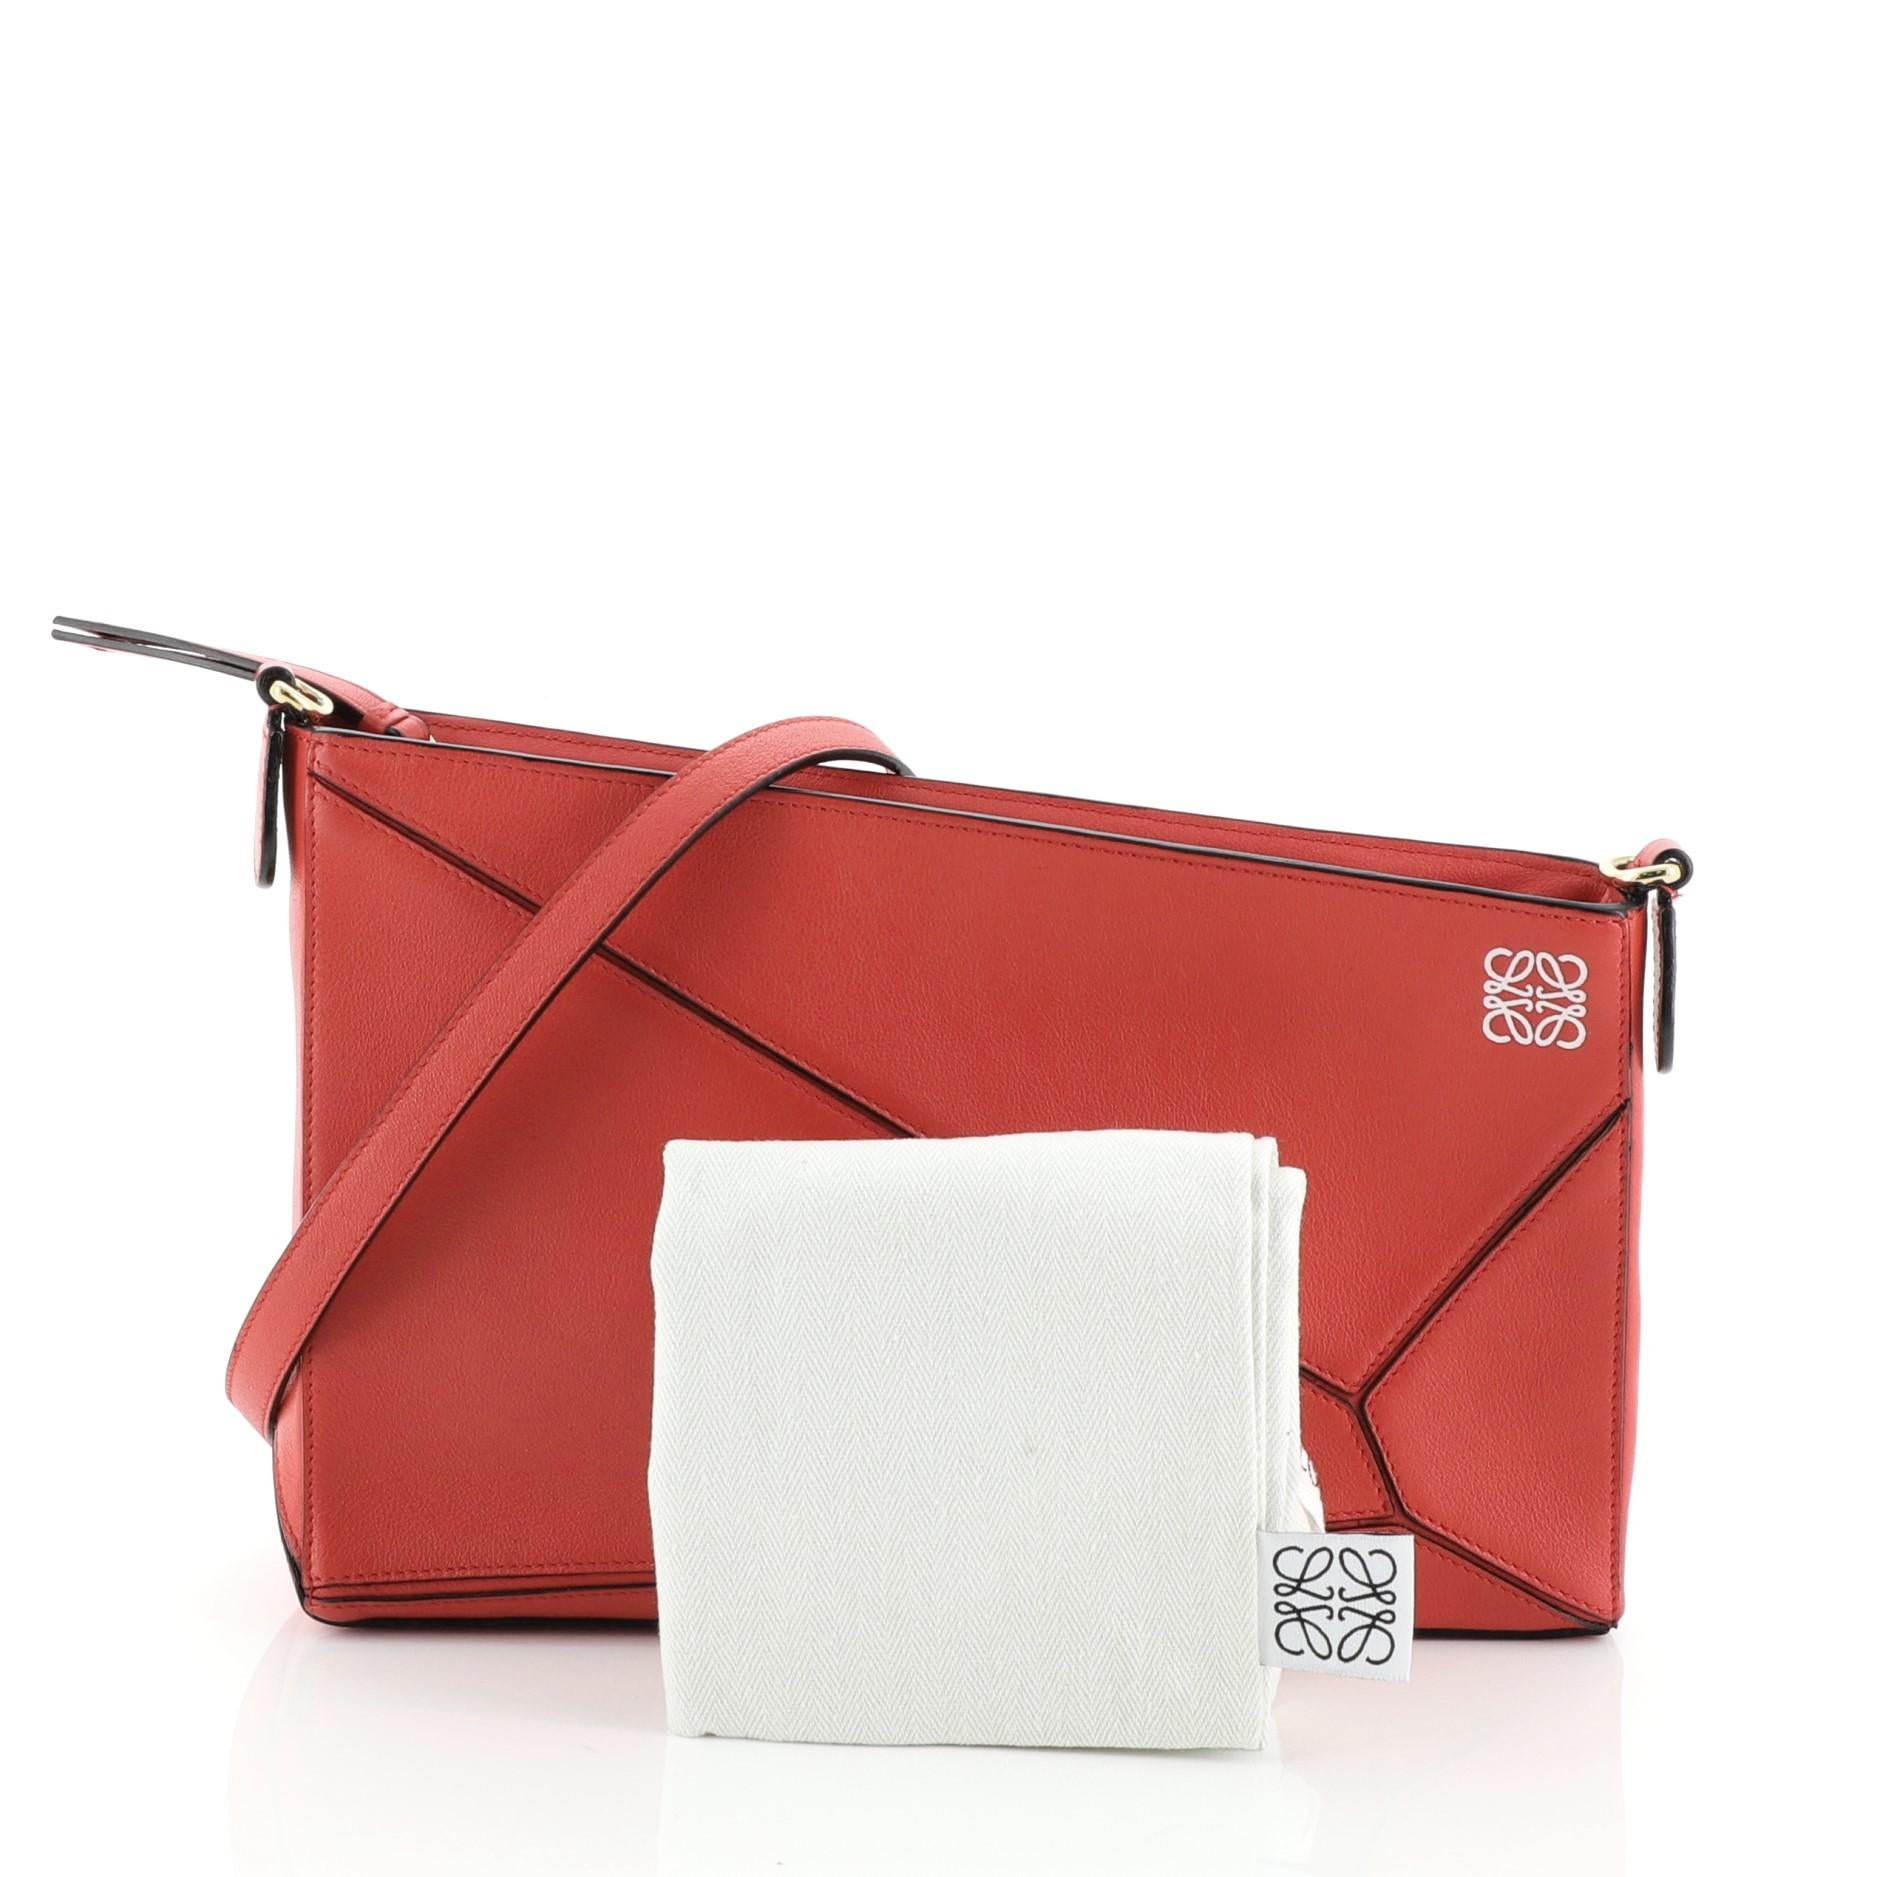 This Loewe Puzzle Pochette Bag Leather Mini, crafted in red leather, features detachable strap, exterior zip pocket and gold-tone hardware. Its top zip closure opens to a black fabric interior with slip pockets. 

Estimated Retail Price: